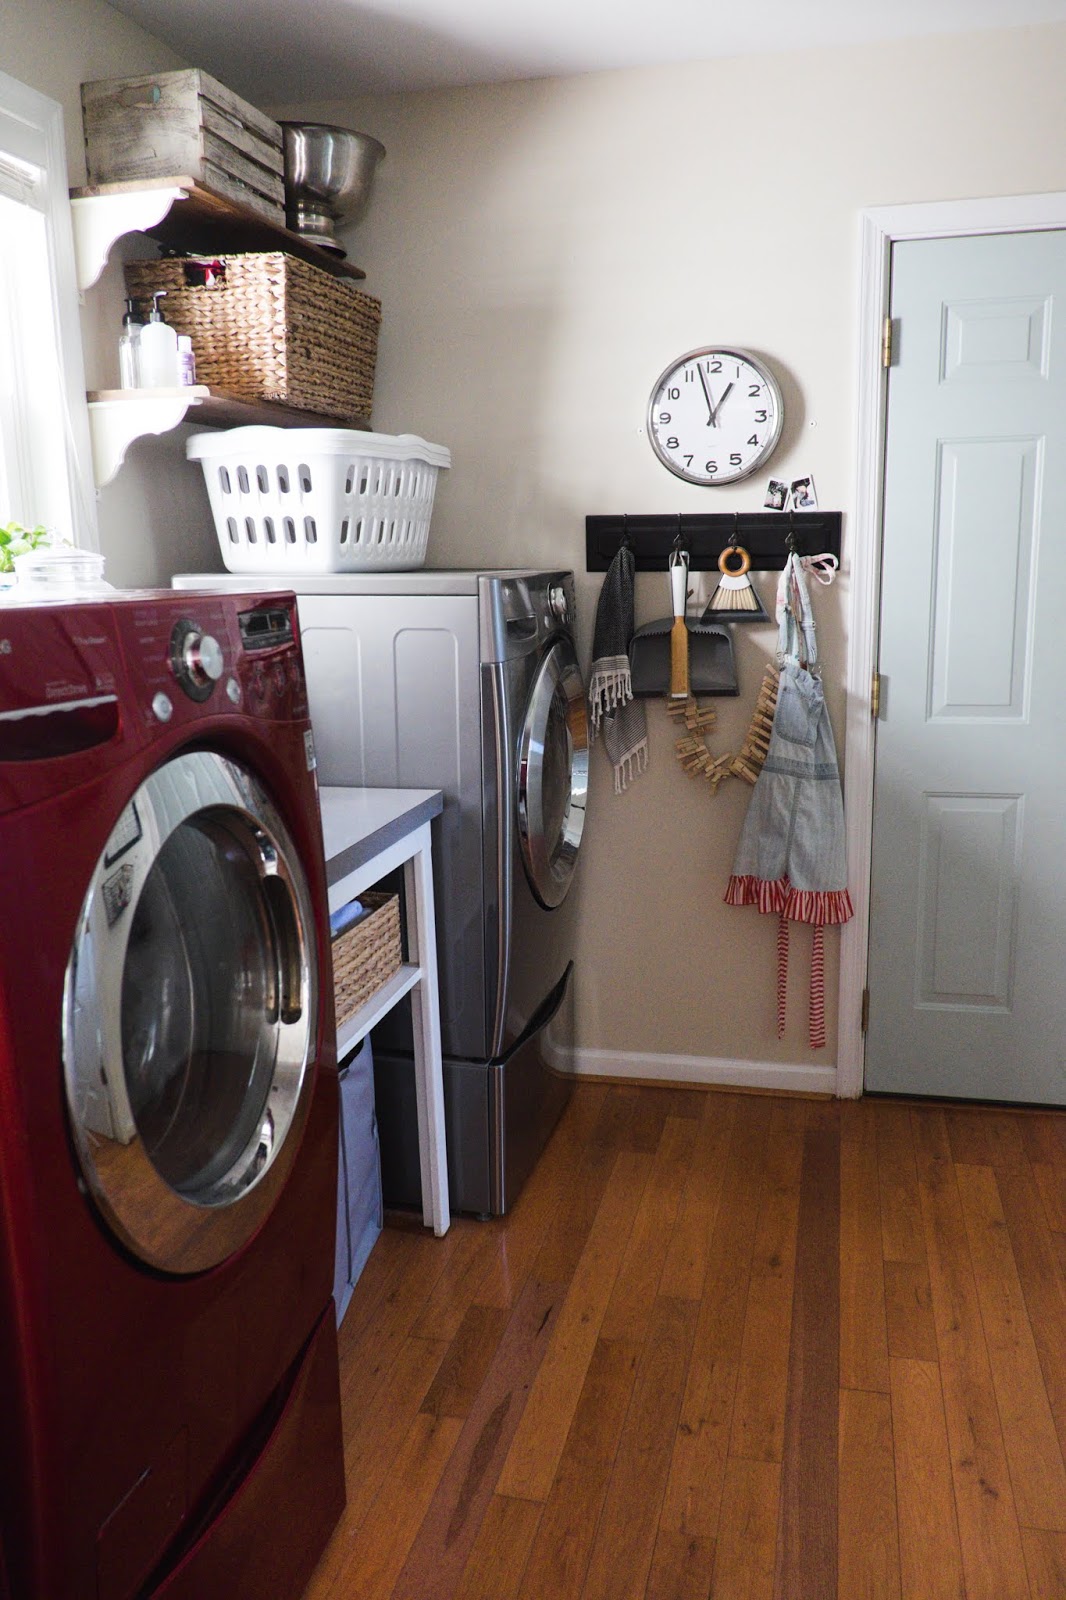 Domestic Fashionista: Our Laundry Room and Main Floor Bathroom